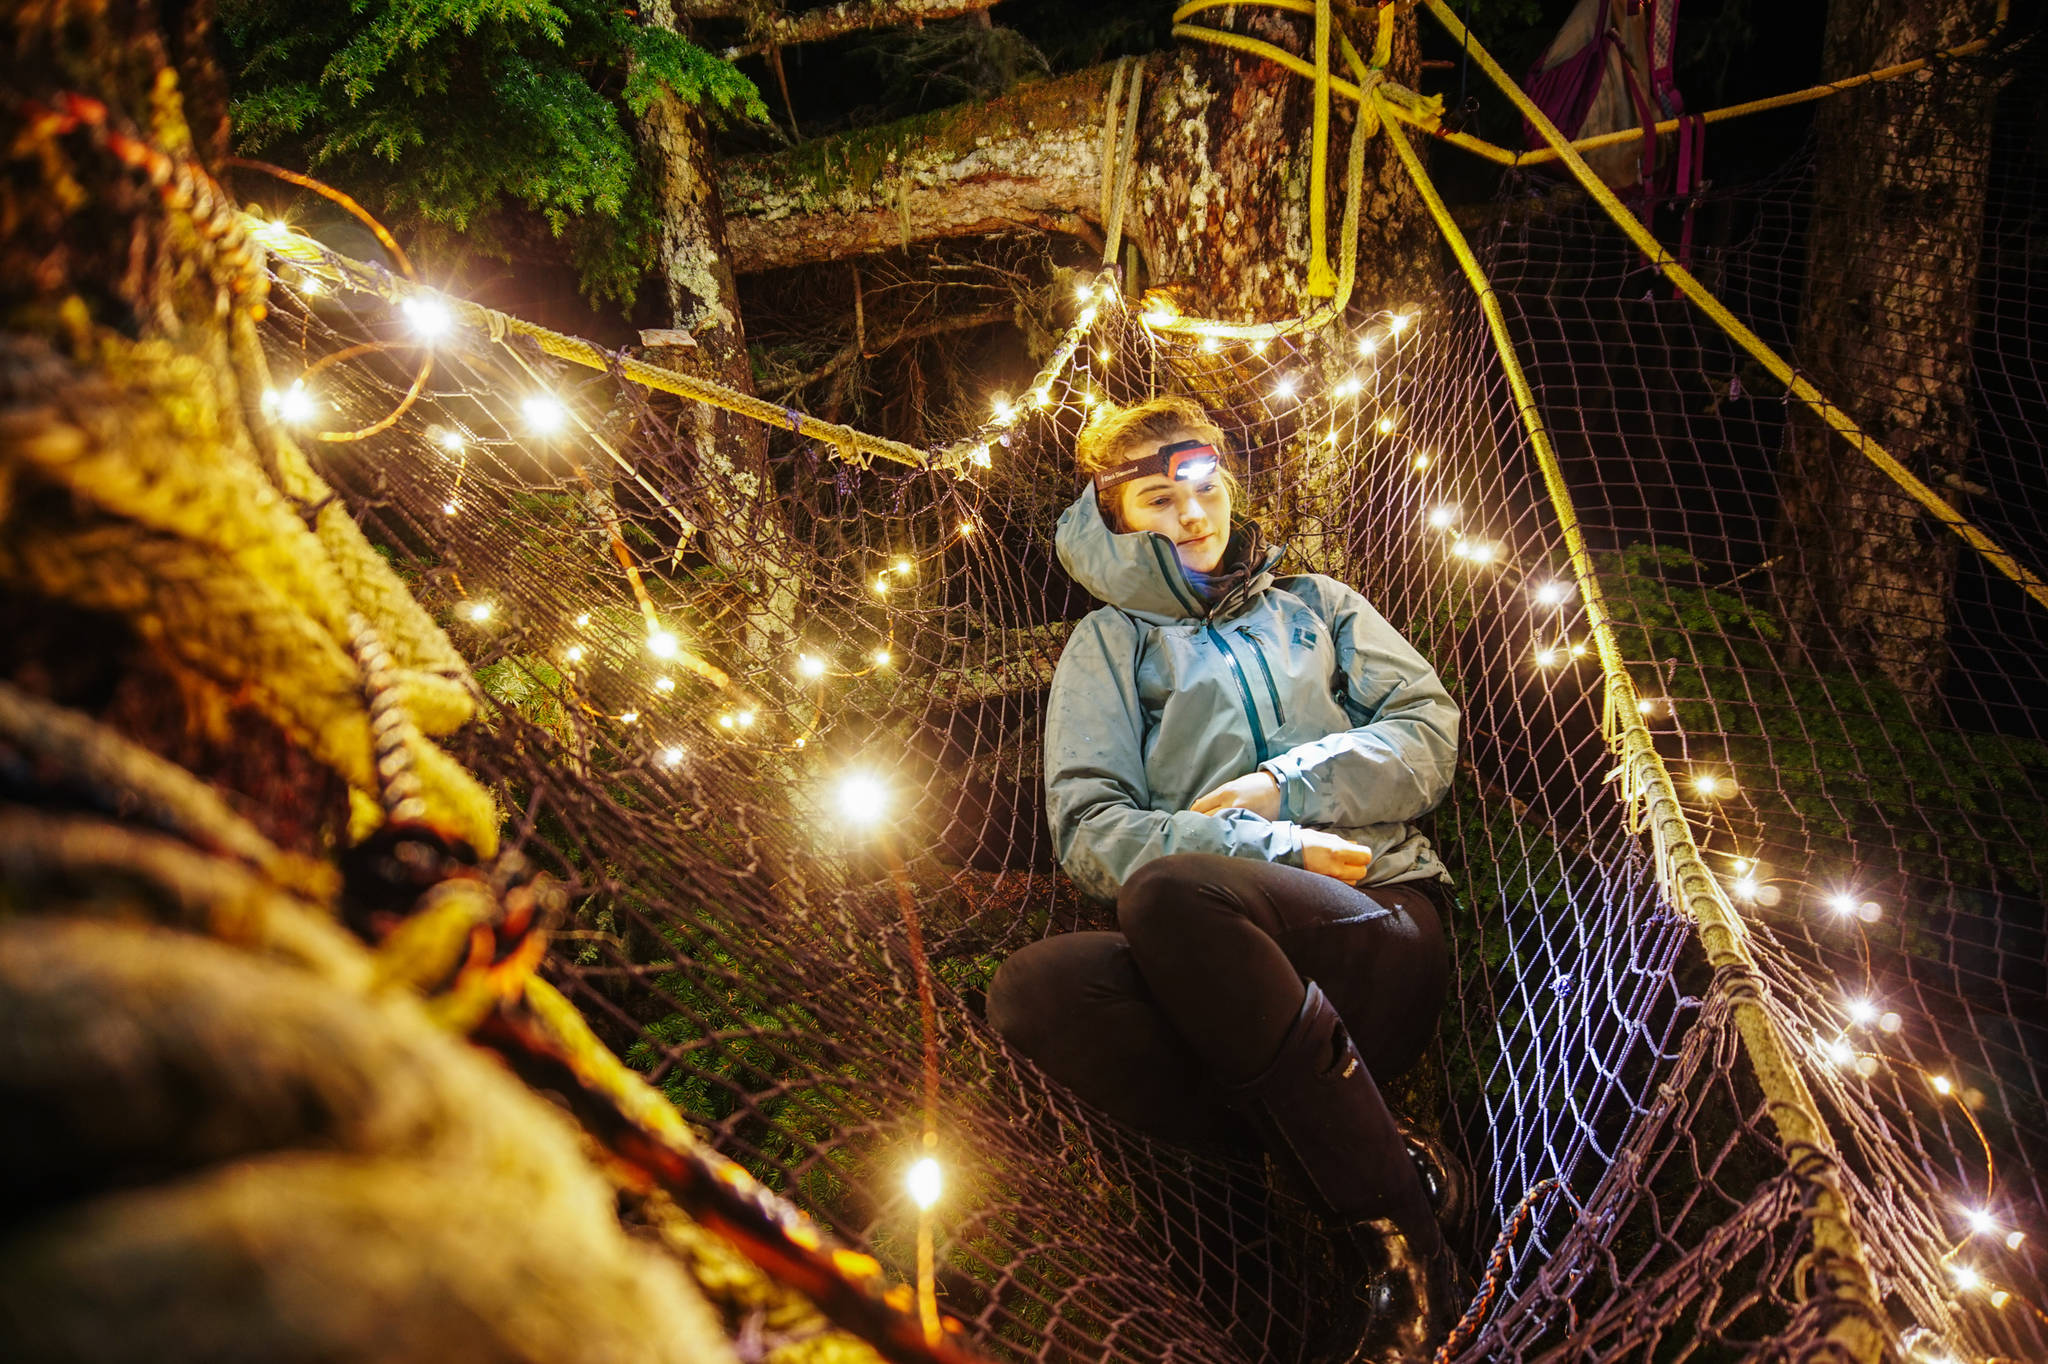 Katie McCaffrey lounges in a small pocket of the tree net. (Gabe Donohoe | For the Juneau Empire)